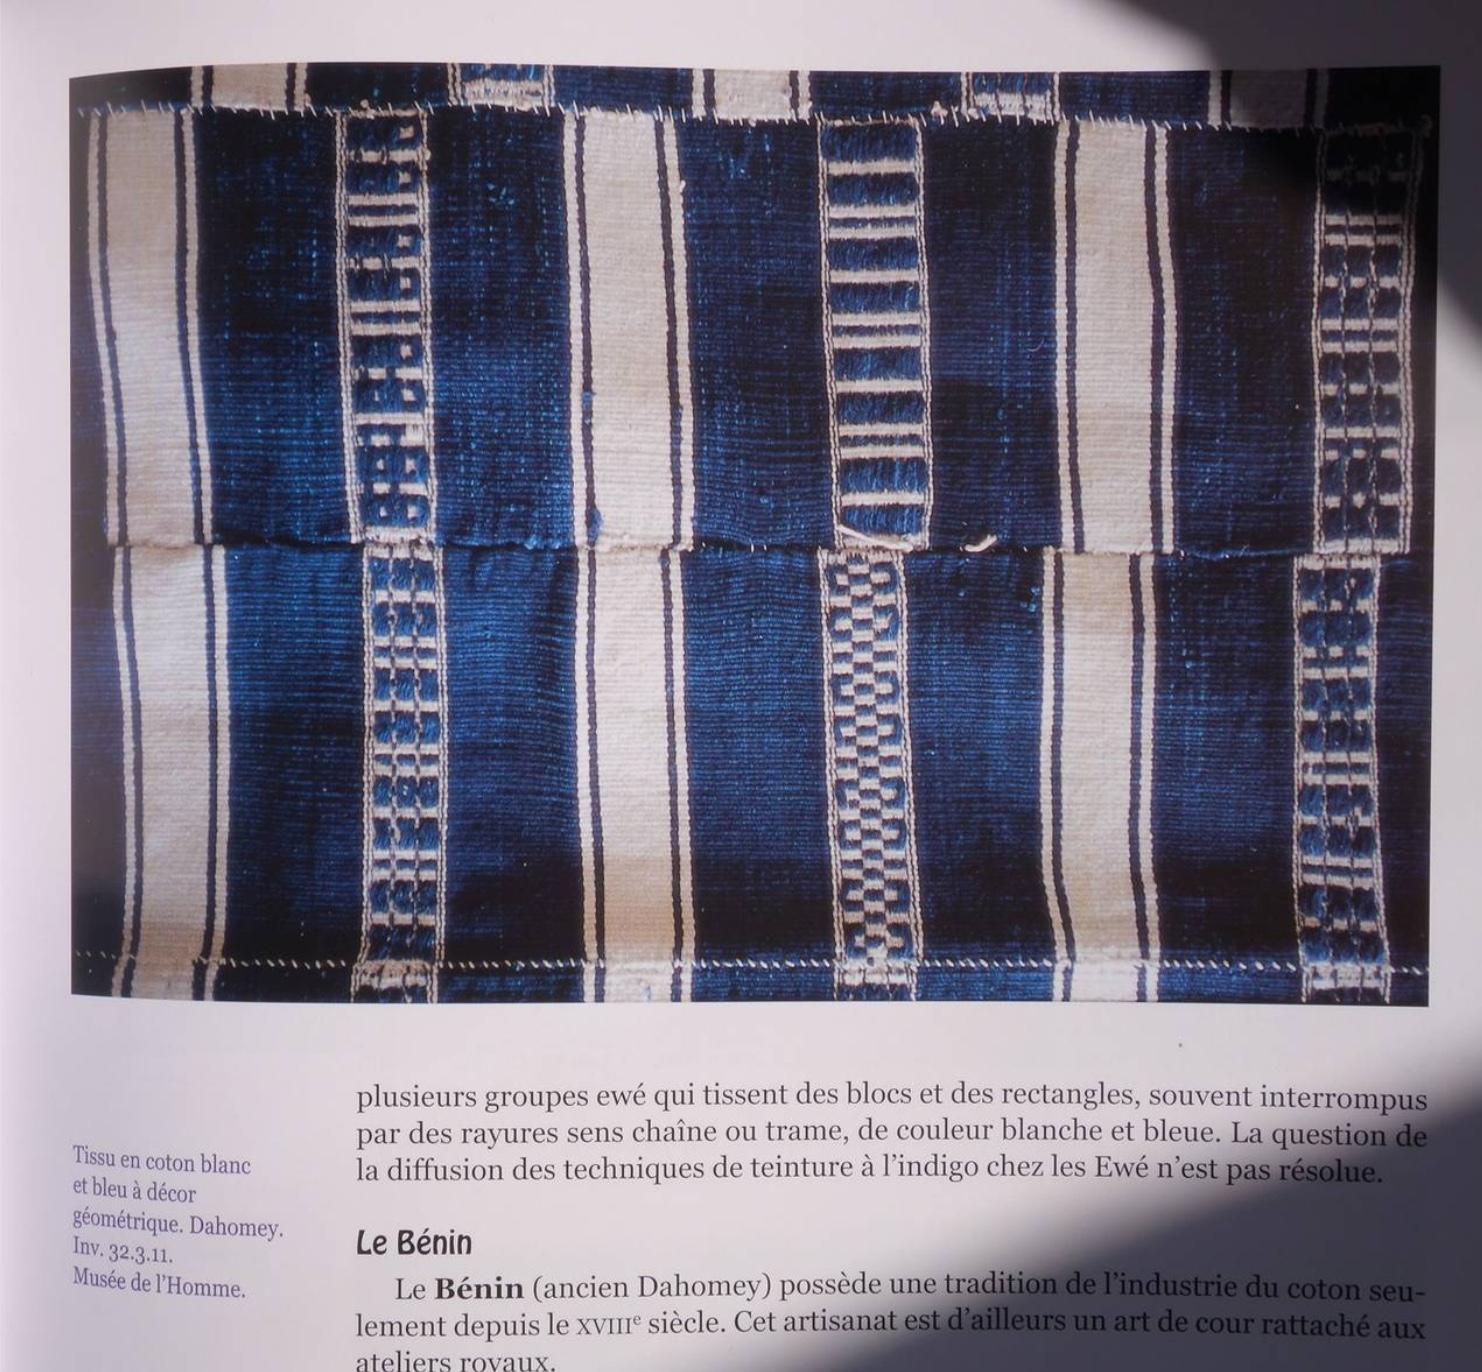 Dyed Museum Quality West African Indigo Textile For Sale